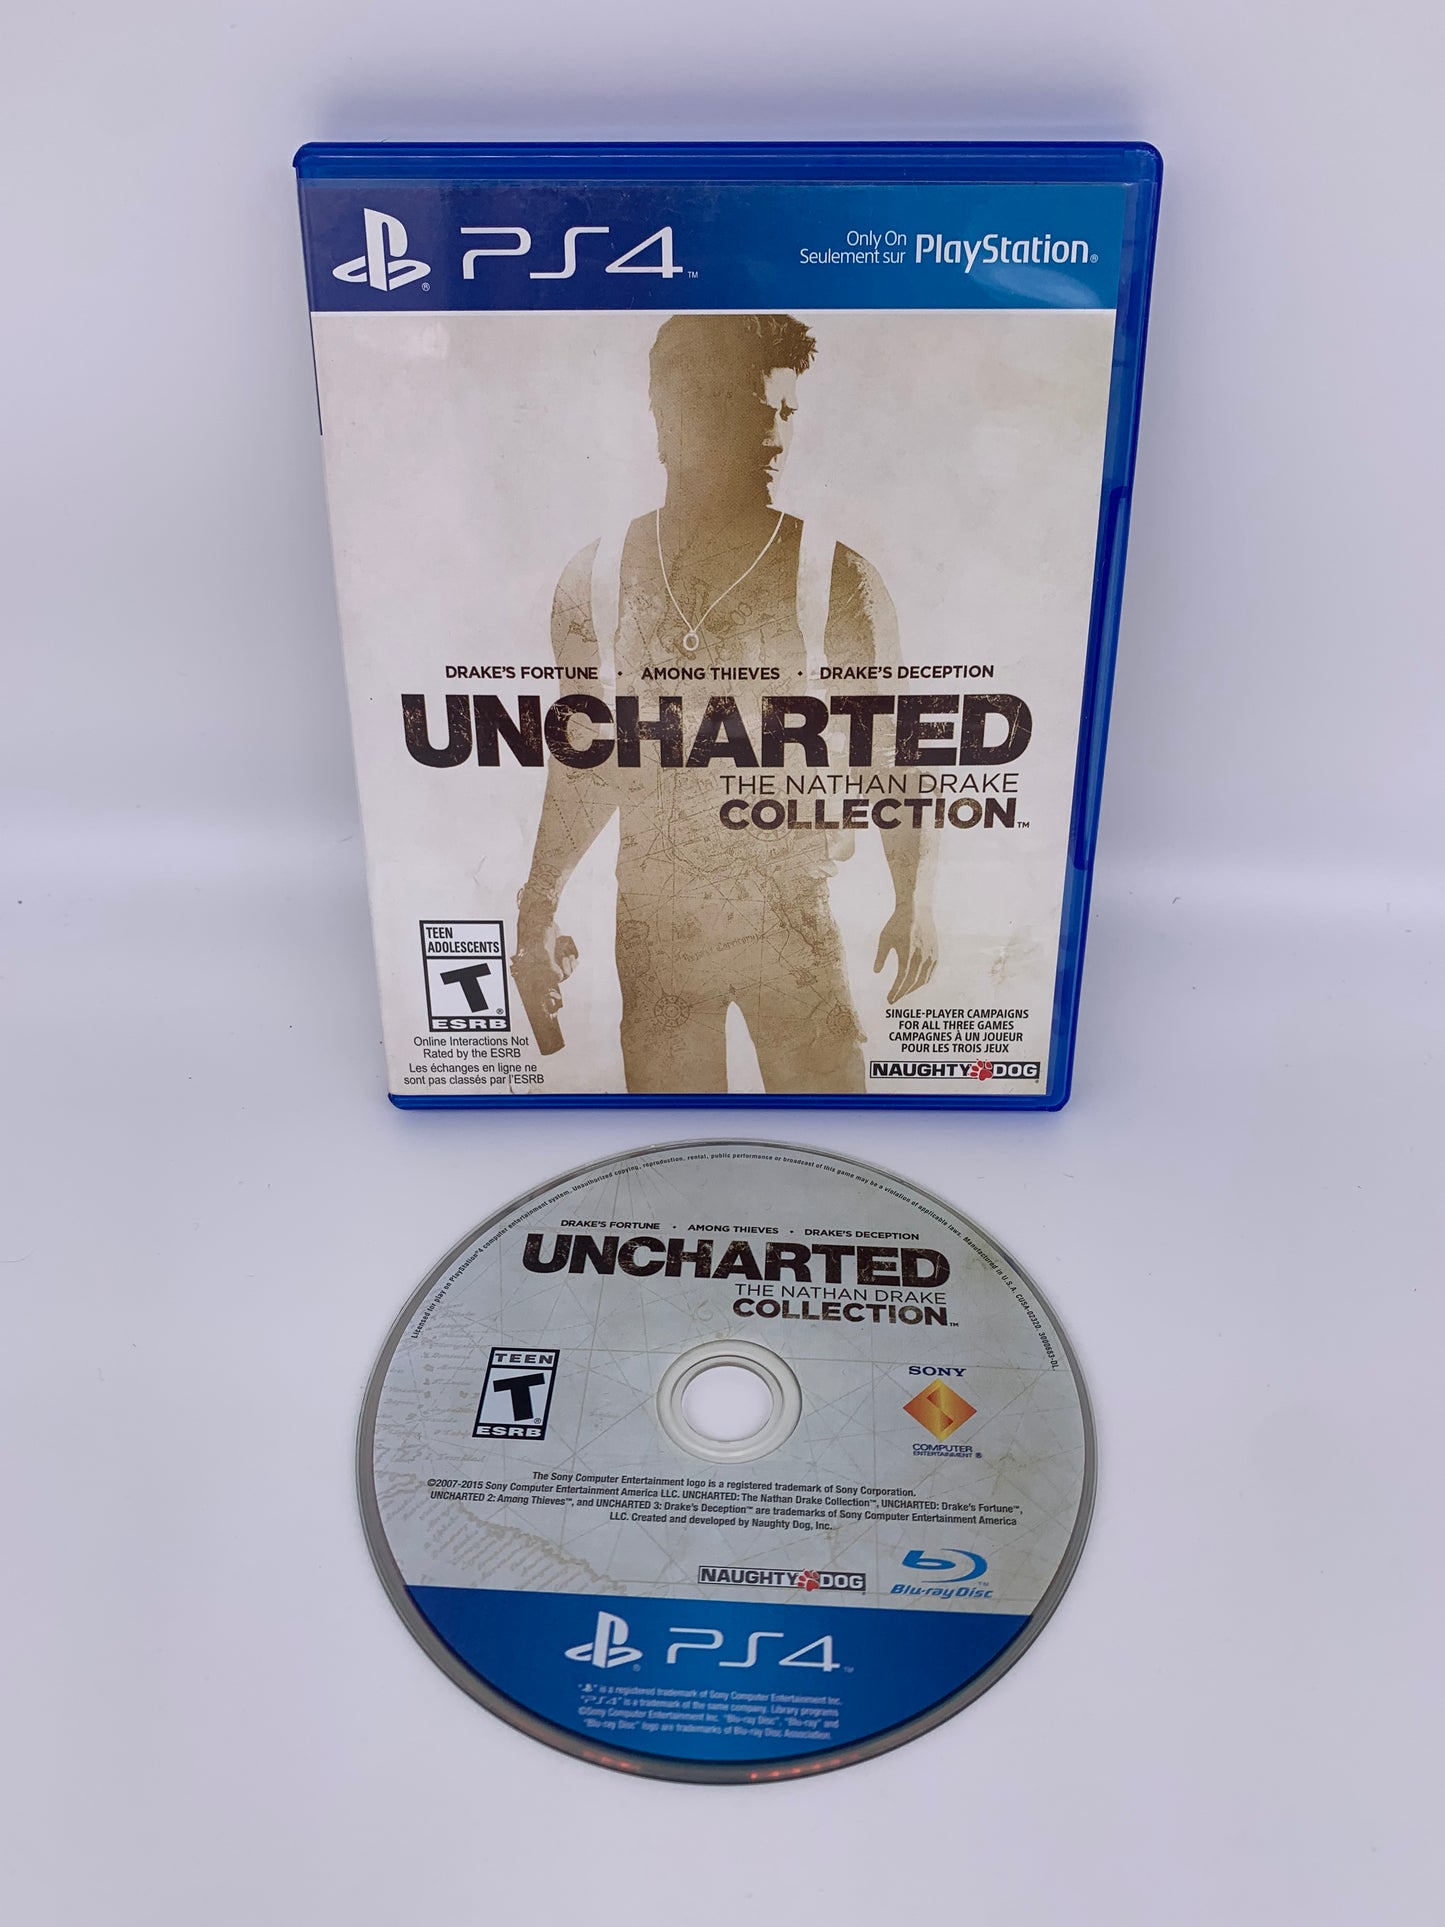 PiXEL-RETRO.COM : SONY PLAYSTATION 4 (PS4) COMPLETE CIB BOX MANUAL GAME NTSC UNCHARTED THE NATHAN DRAKE COLLECTION